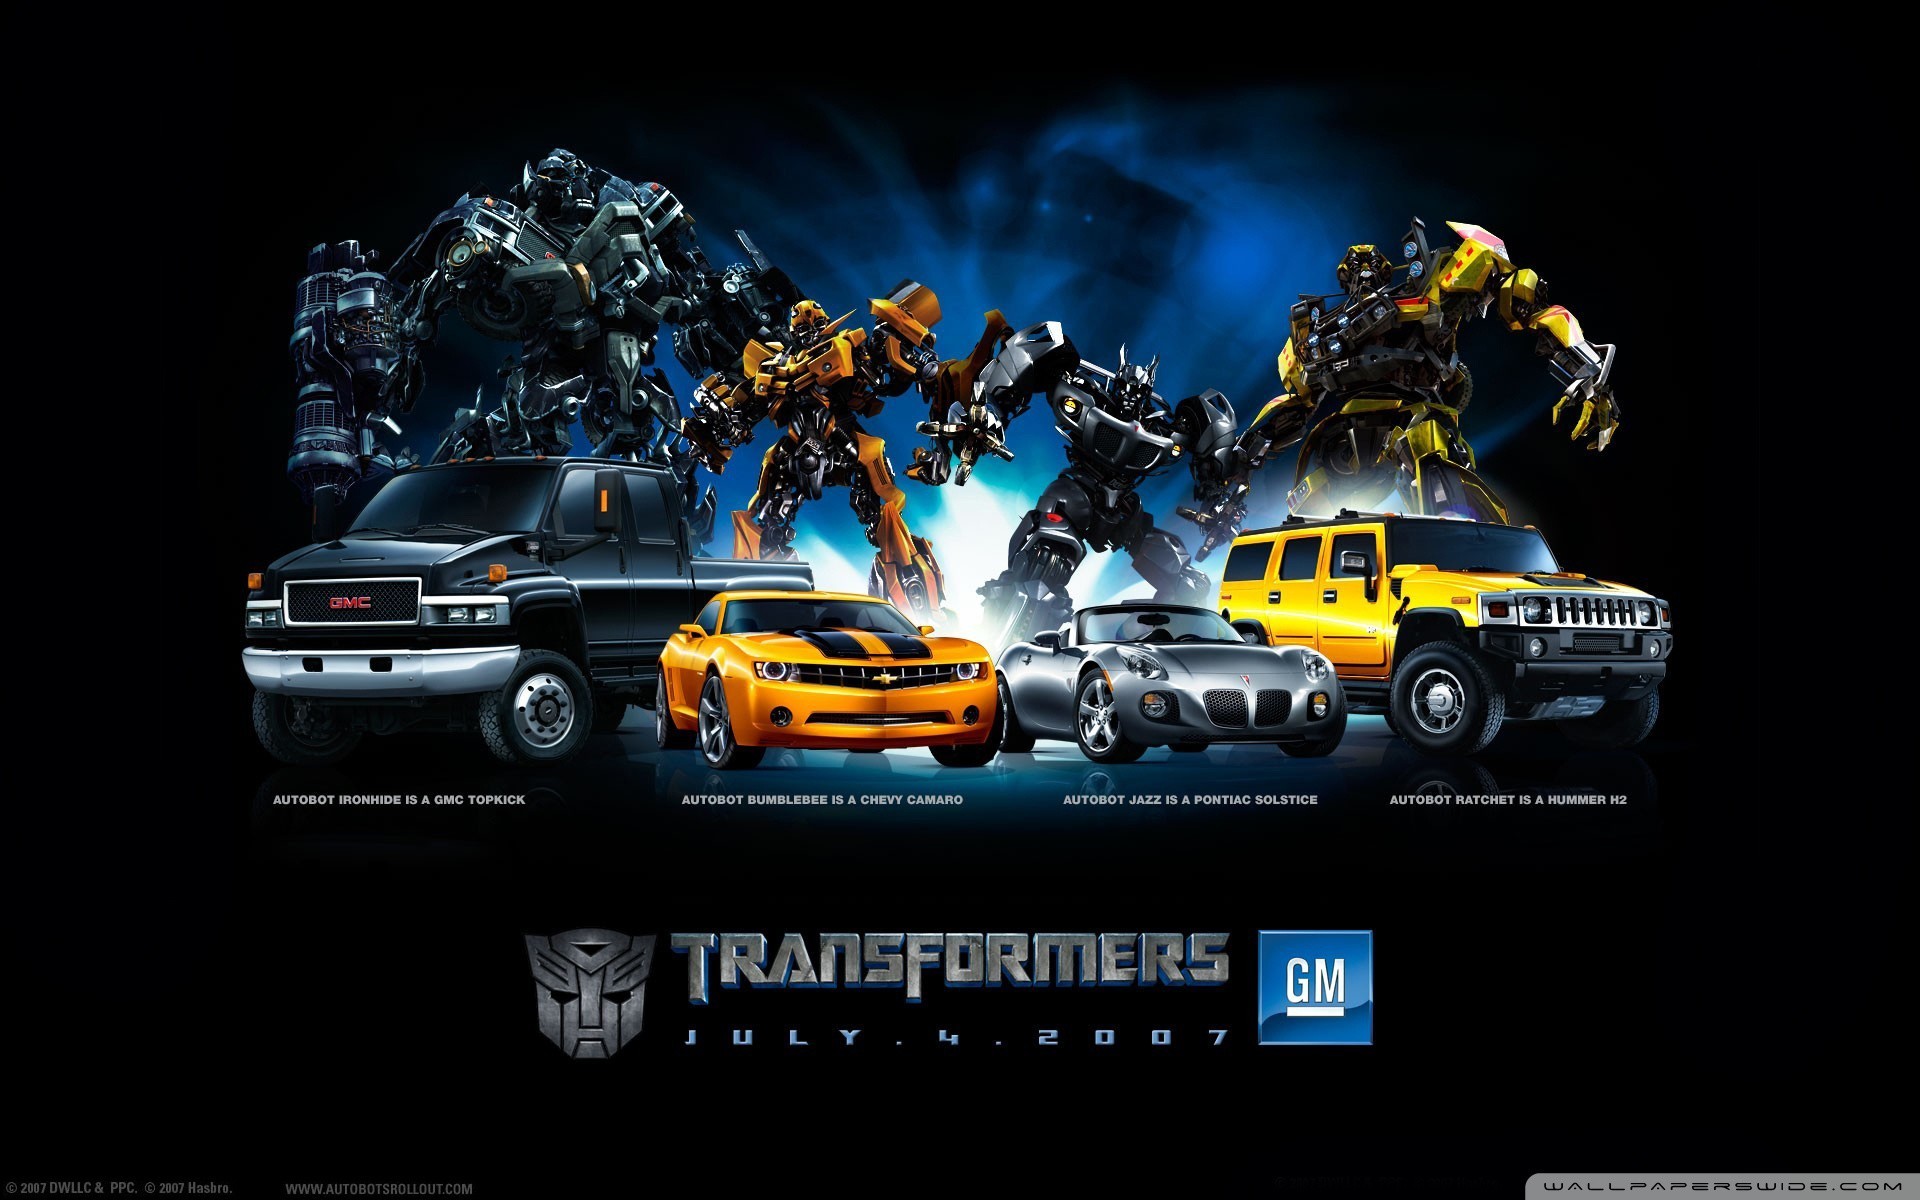 1920x1200  Transformers: Dark Of The Moon HD Wallpapers Backgrounds  1600Ã—900 Transformers 3 HD Wallpapers (46 Wallpapers) | Adorable Wallpapers  | Desktop ...